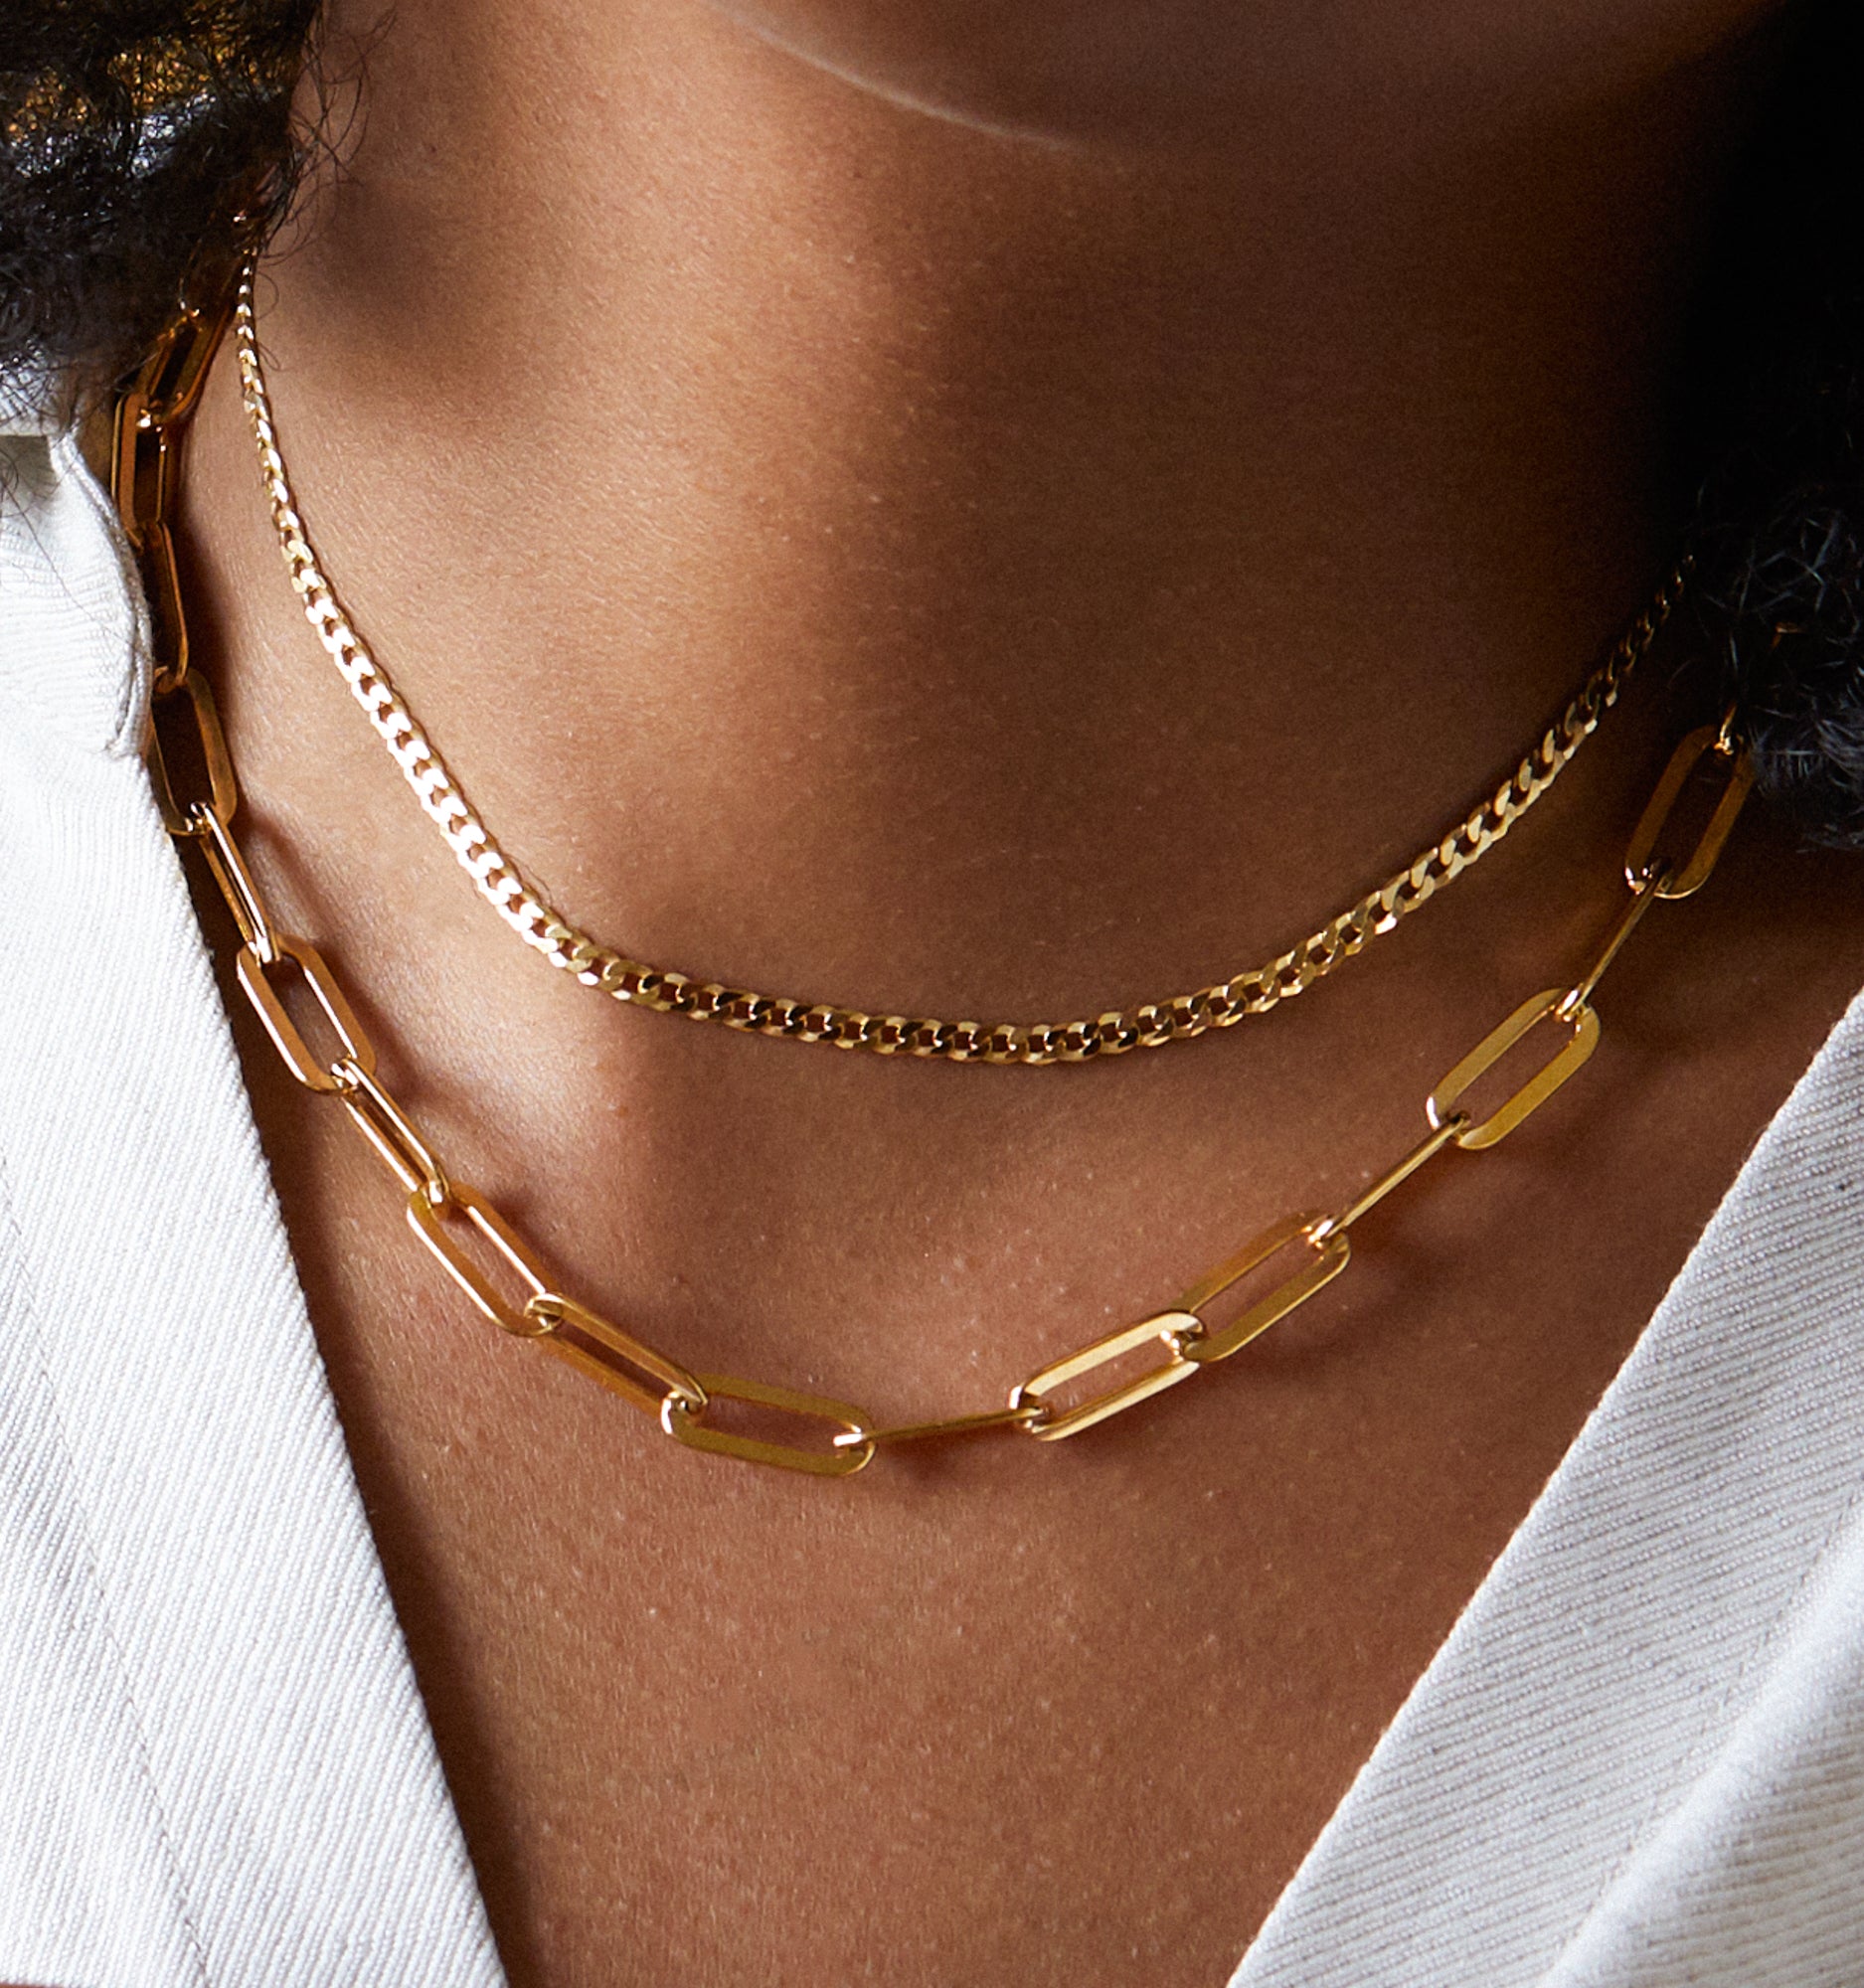 Gold Links Necklace